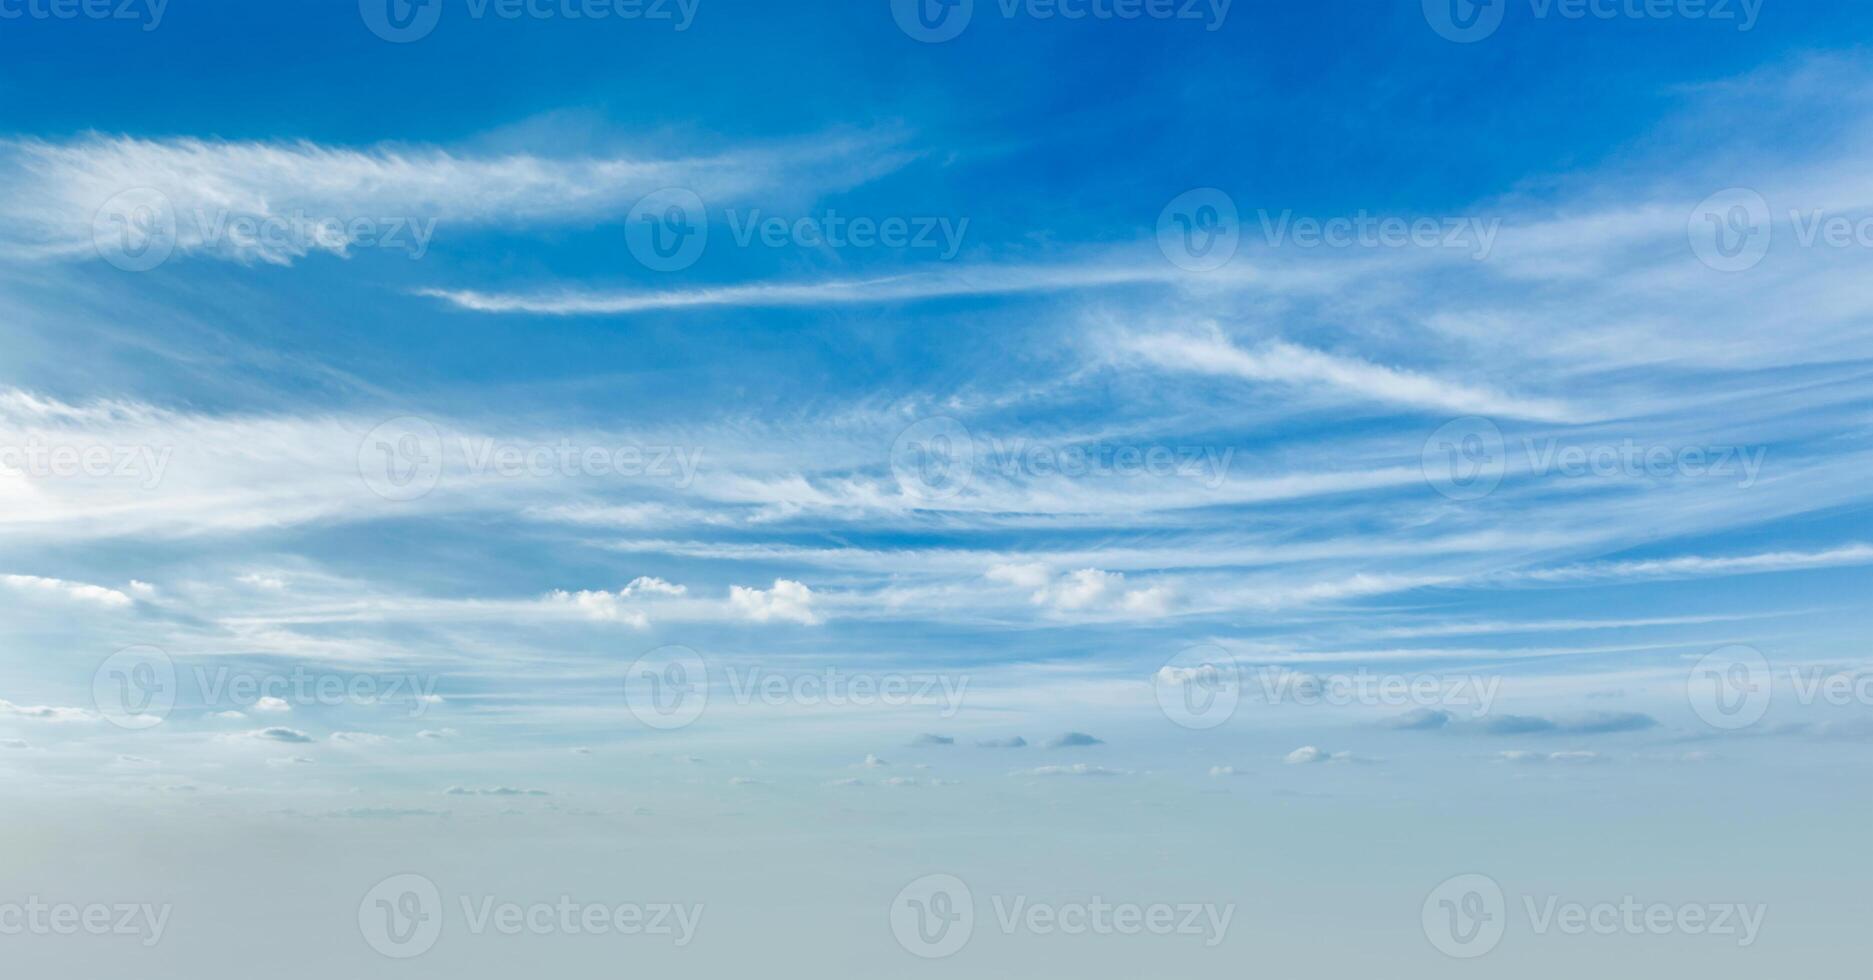 Blue sky with clouds photo